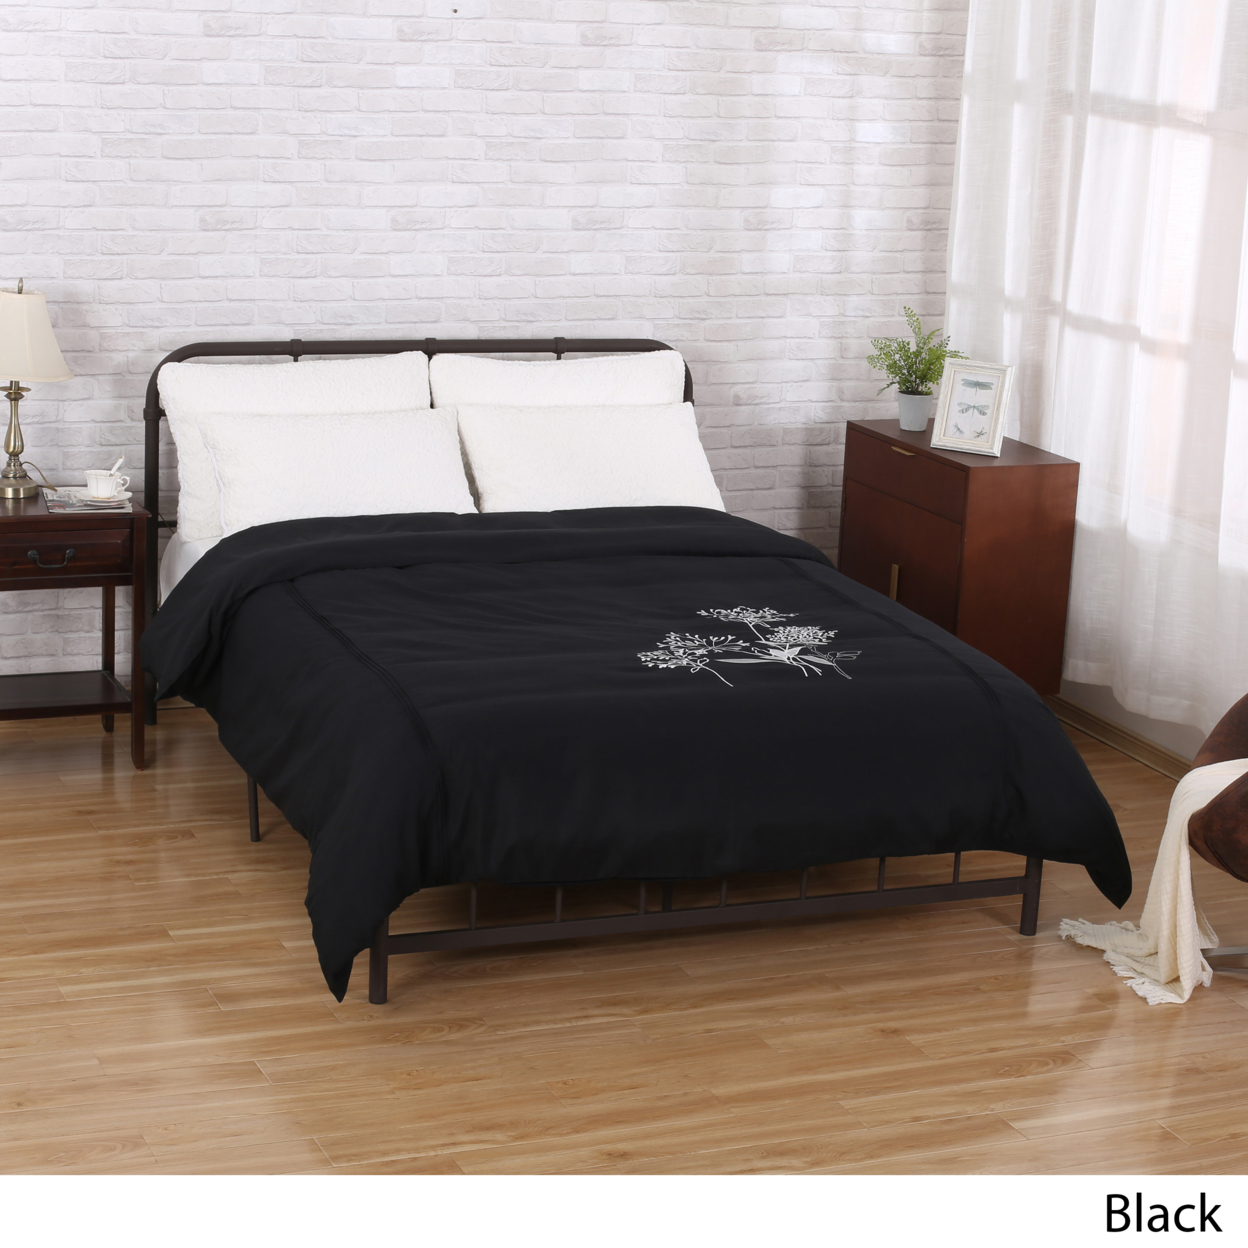 Miley Queen Size Fabric Duvet With Floral Design - Black